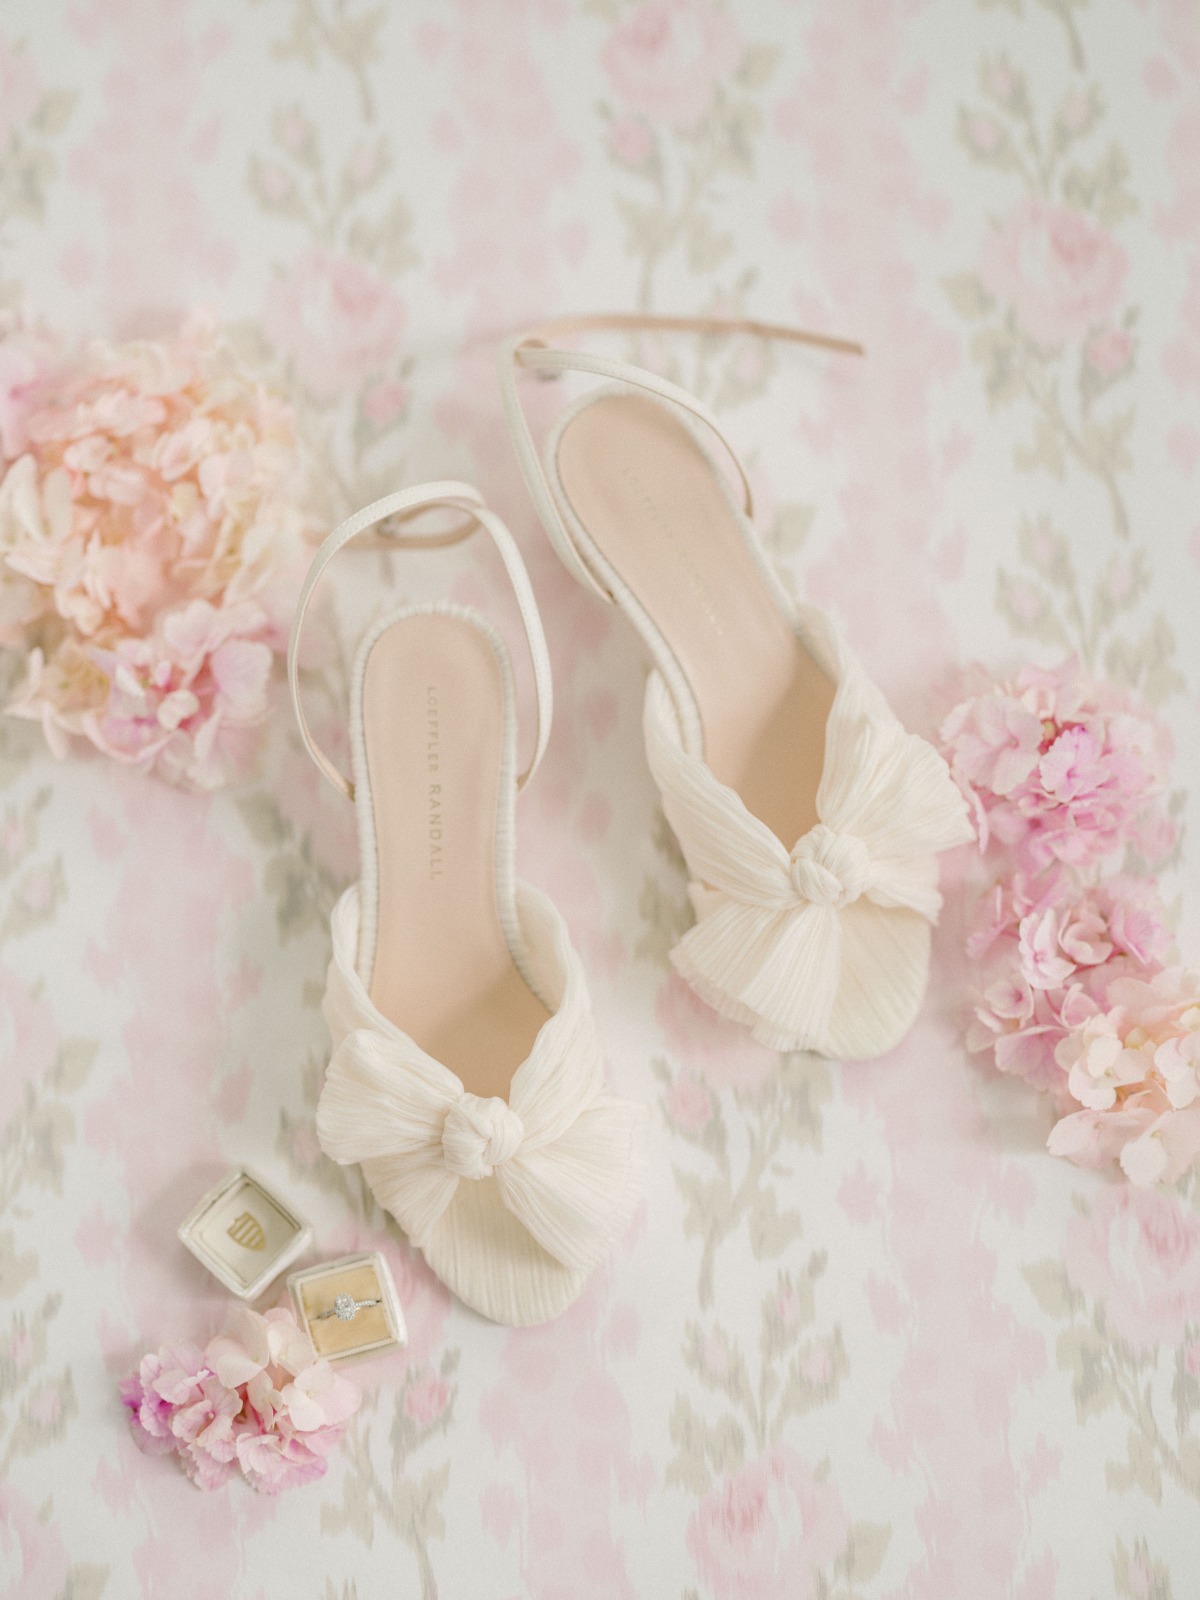 Aerial photo of bride's wedding shoes and jewelry